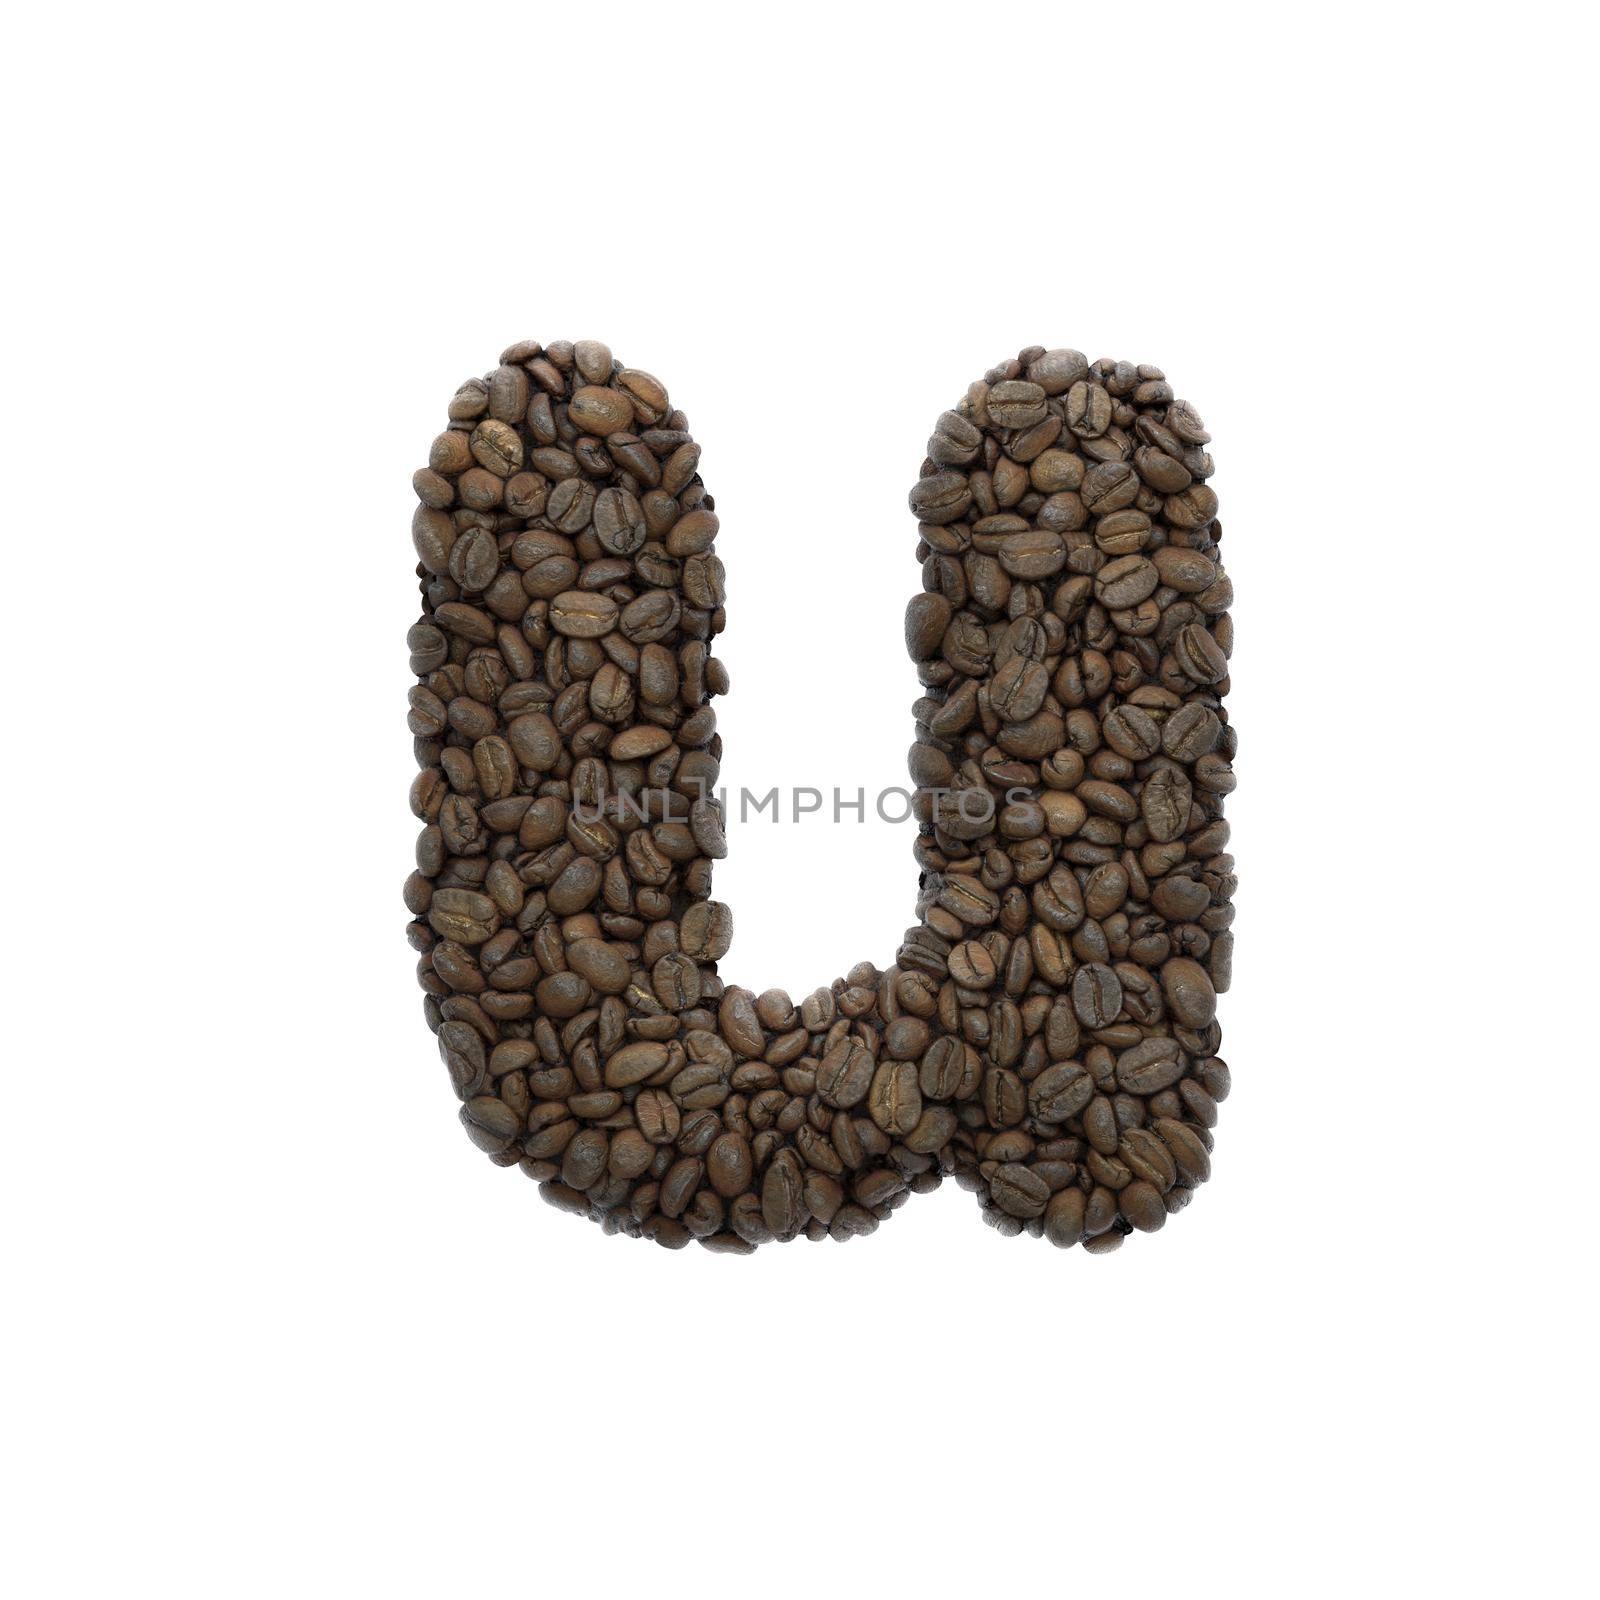 Coffee letter U - Small 3d roasted beans font - Suitable for Coffee, energy or insomnia related subjects by chrisroll